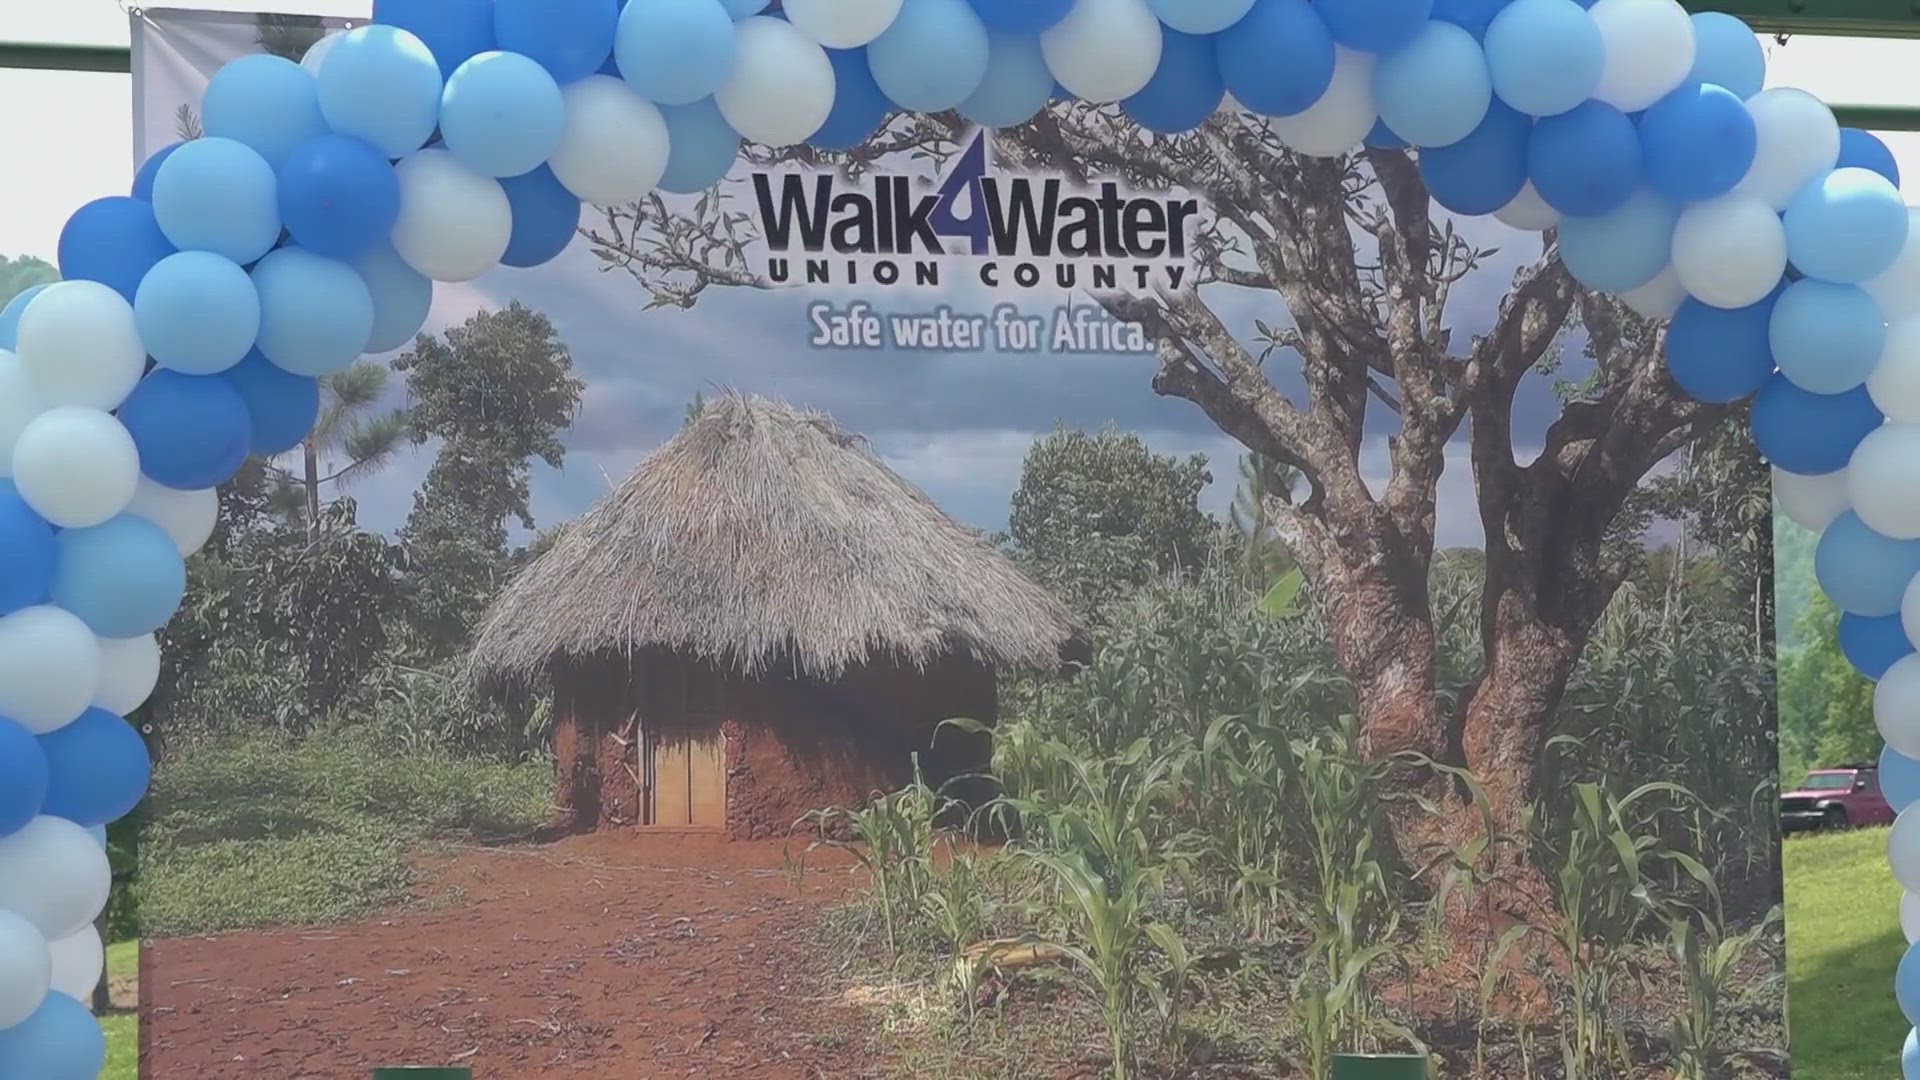 The "Walk 4 Water" event is a fundraiser where the money would go towards building new wells in villages in Uganda where the people have limited access to water.